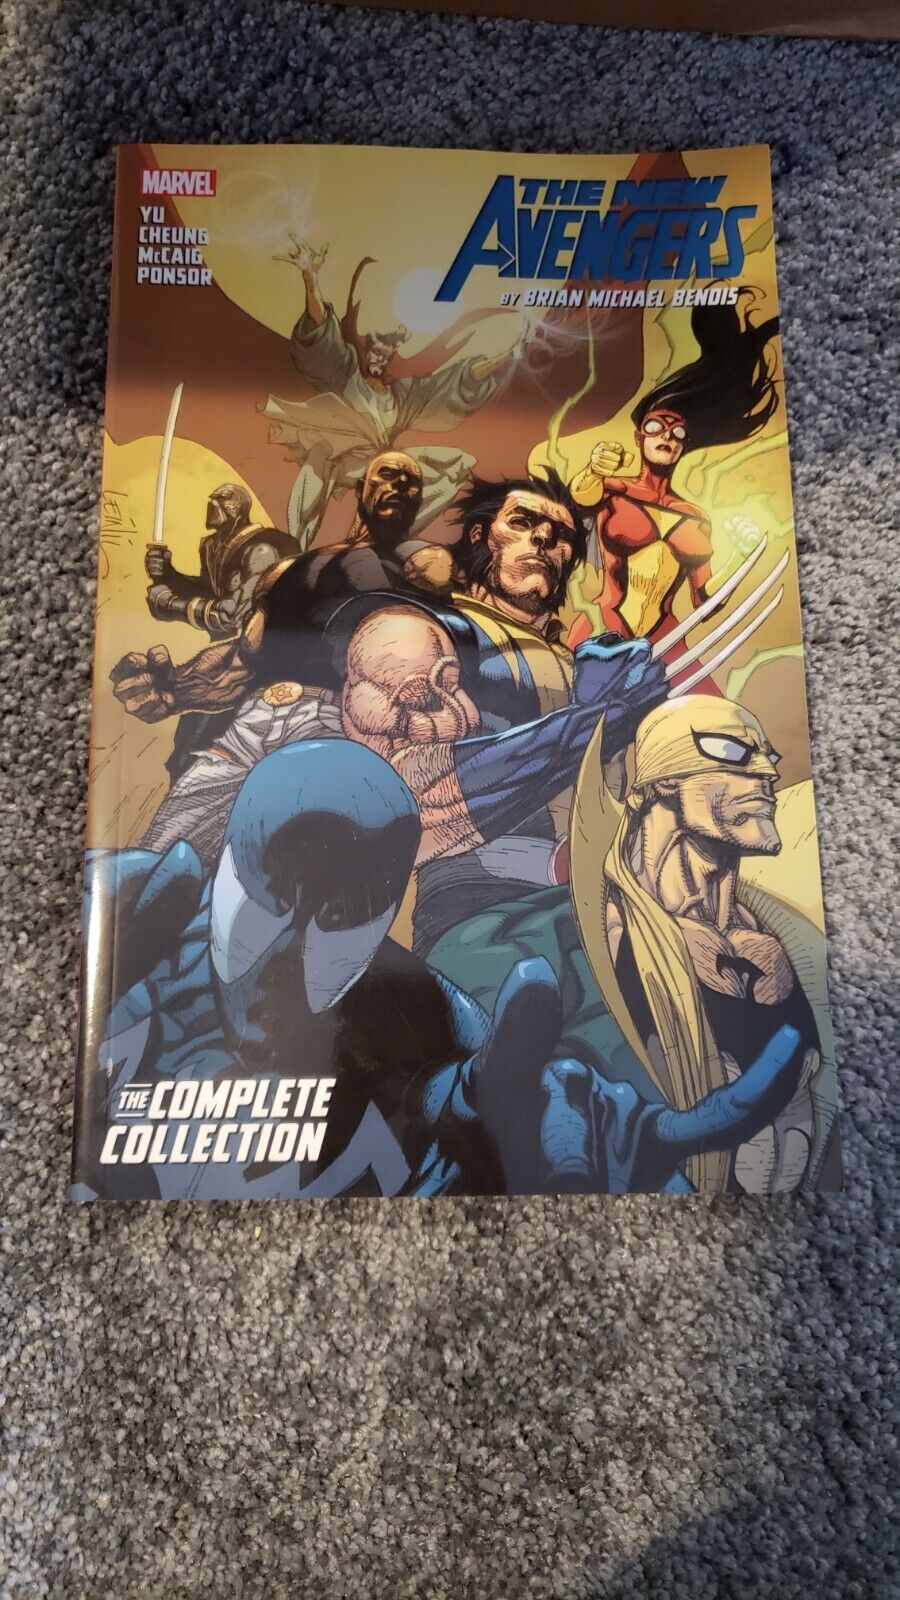 New Avengers by Brian Michael Bendis: the Complete Collection #3 (Marvel Comics